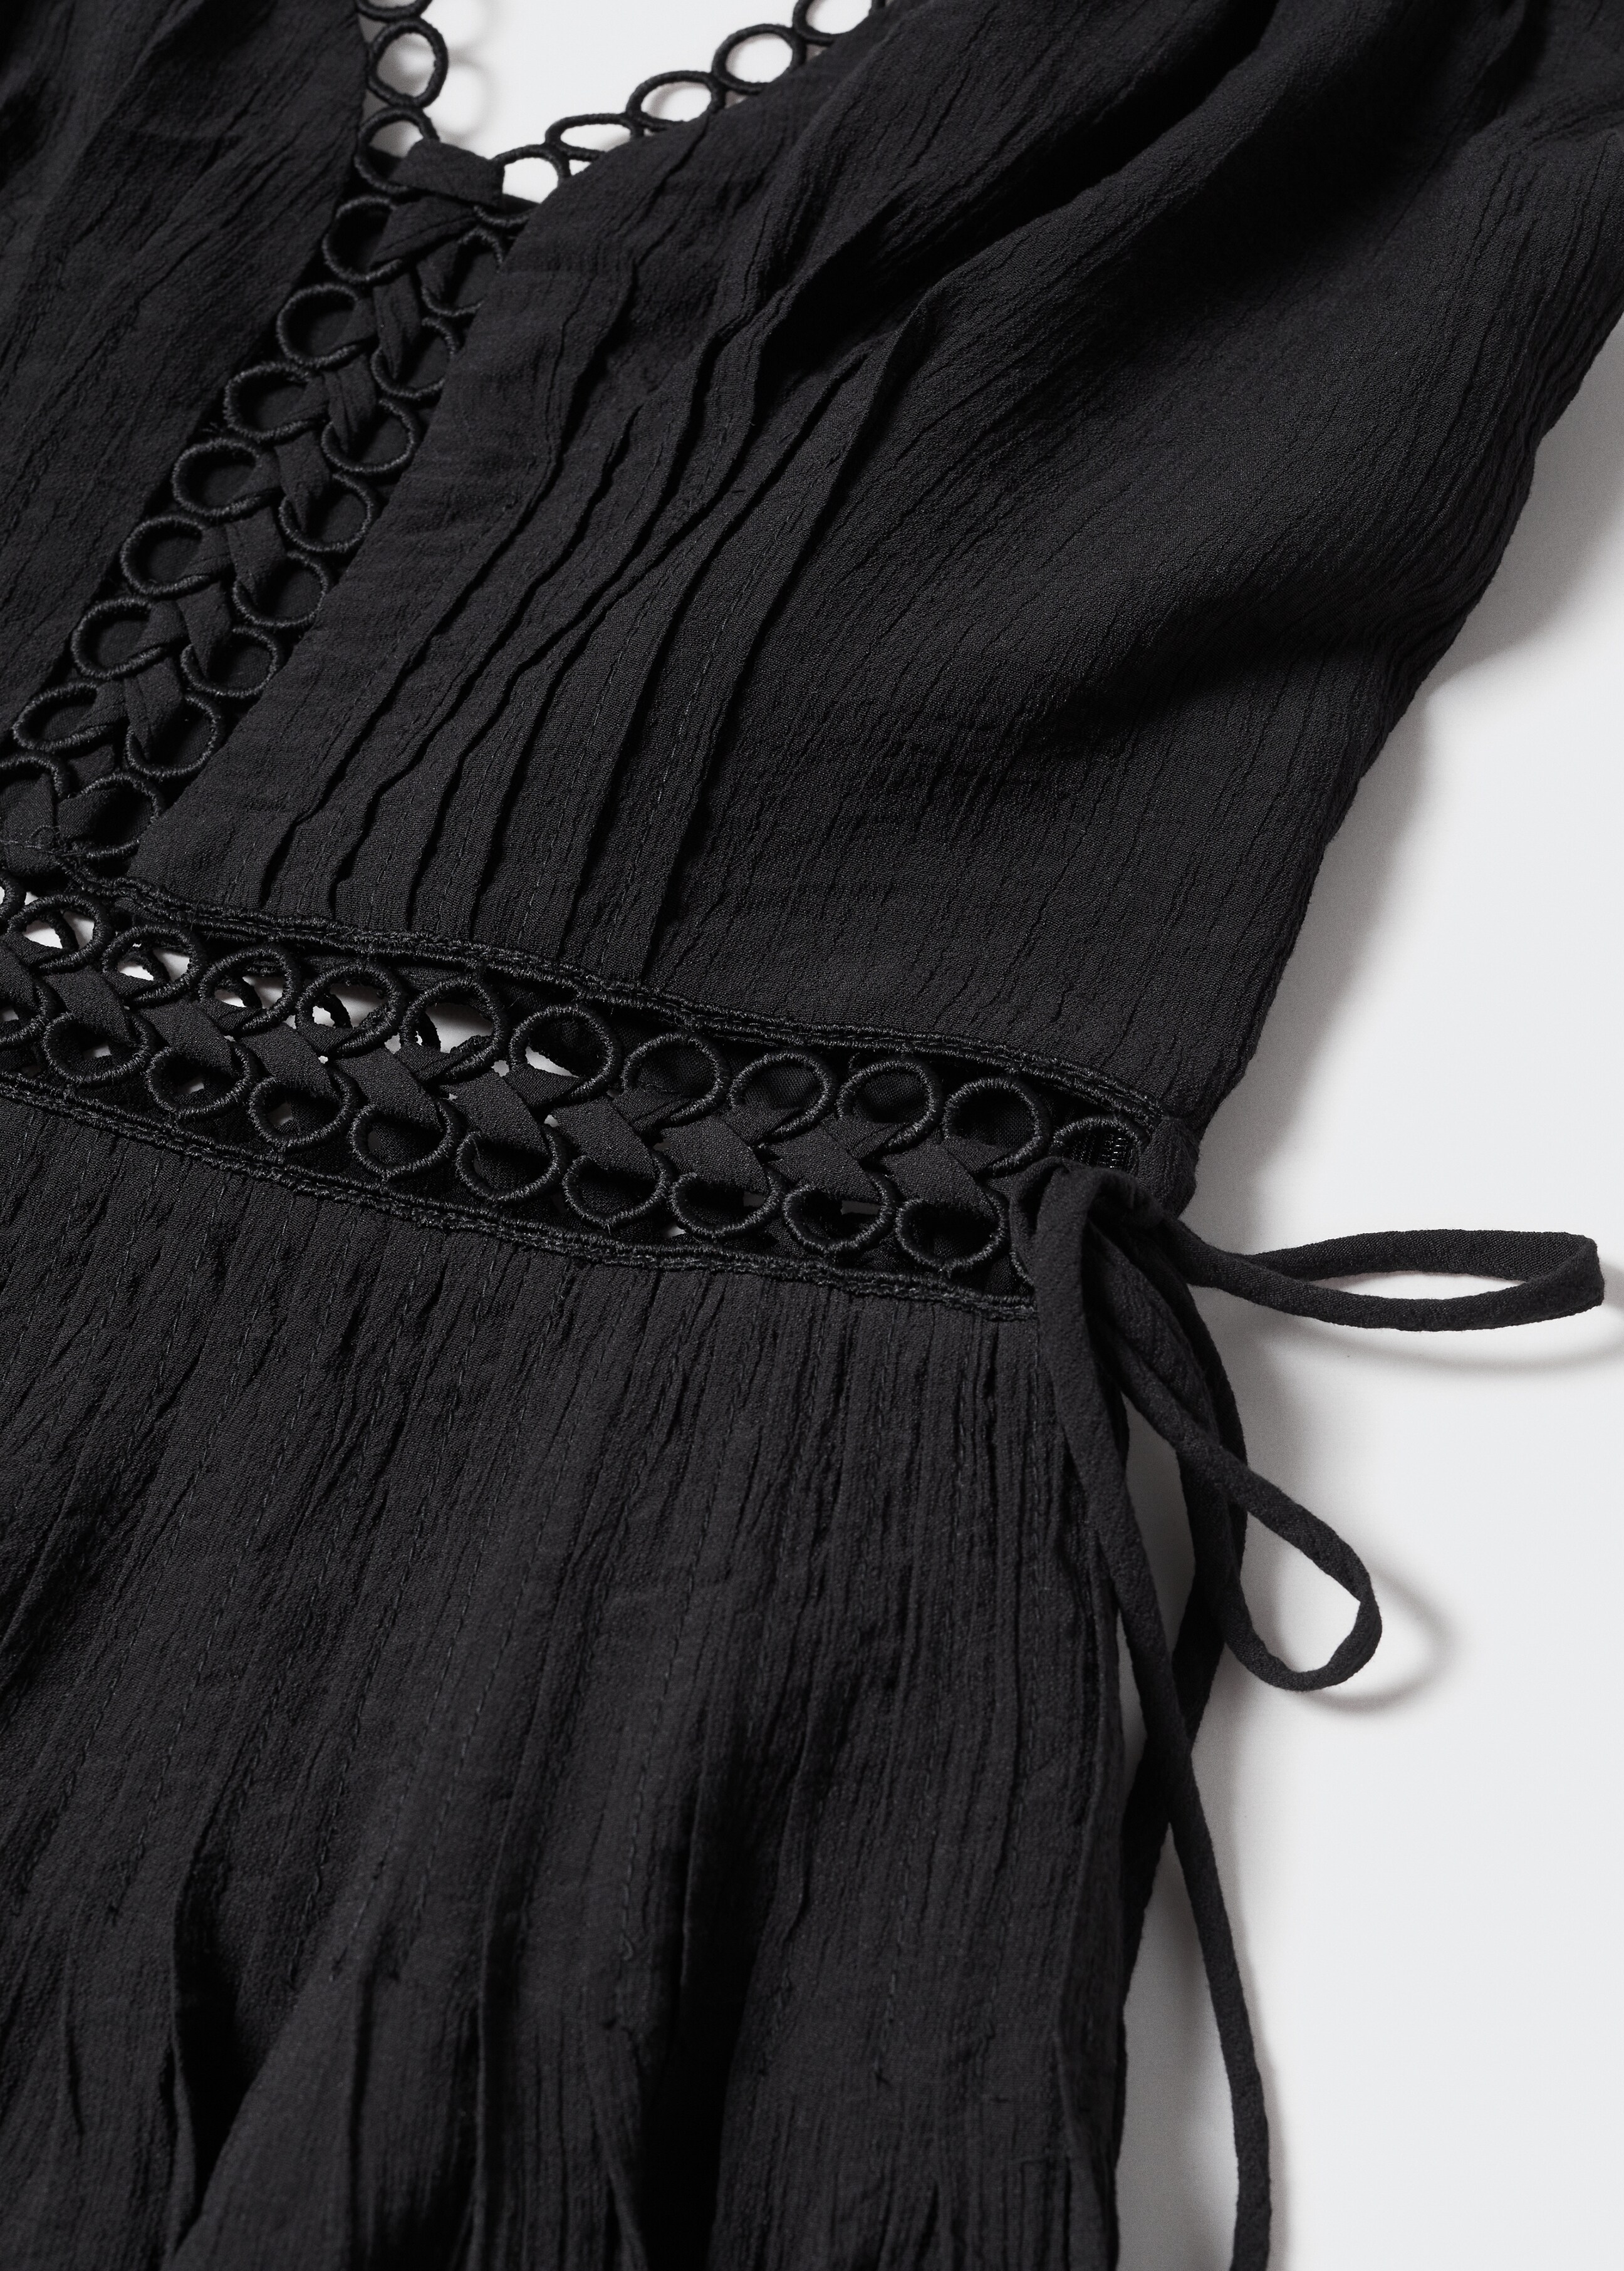 Openwork dress with double straps - Details of the article 8